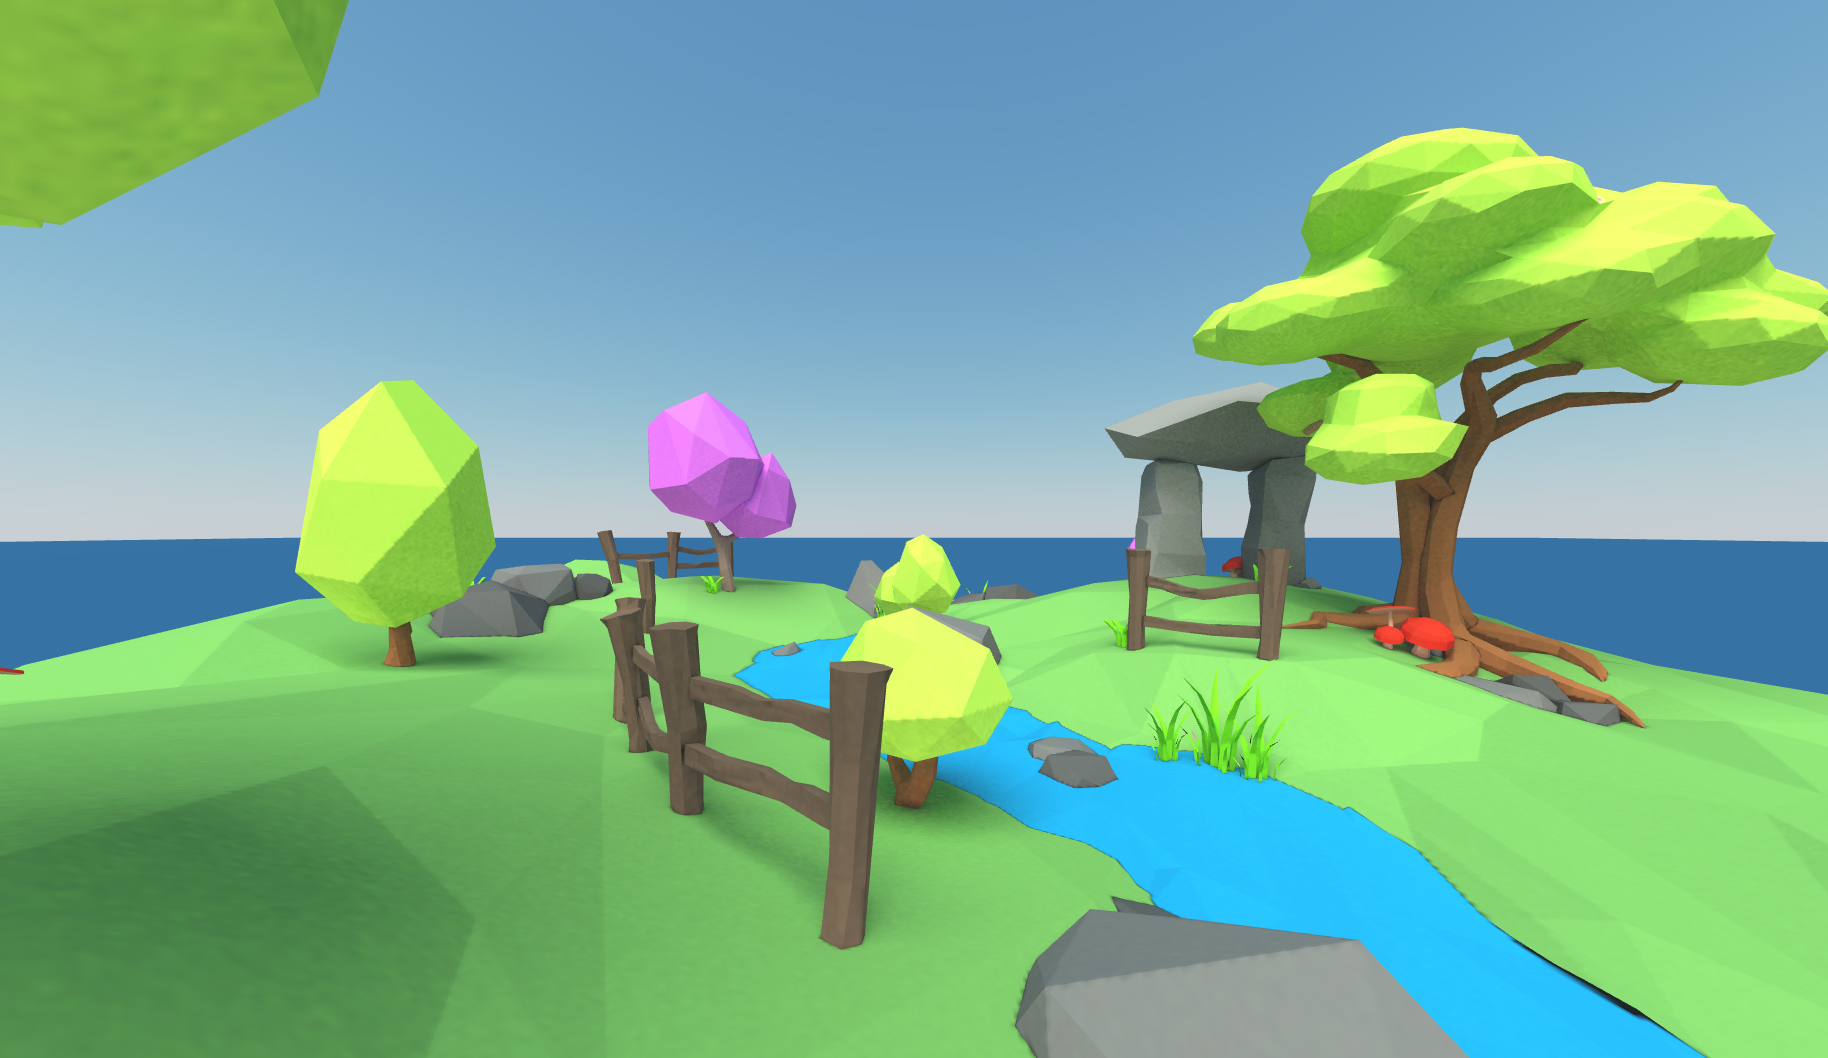 An early Hubs scene of a small low-poly island scene with trees and a river.